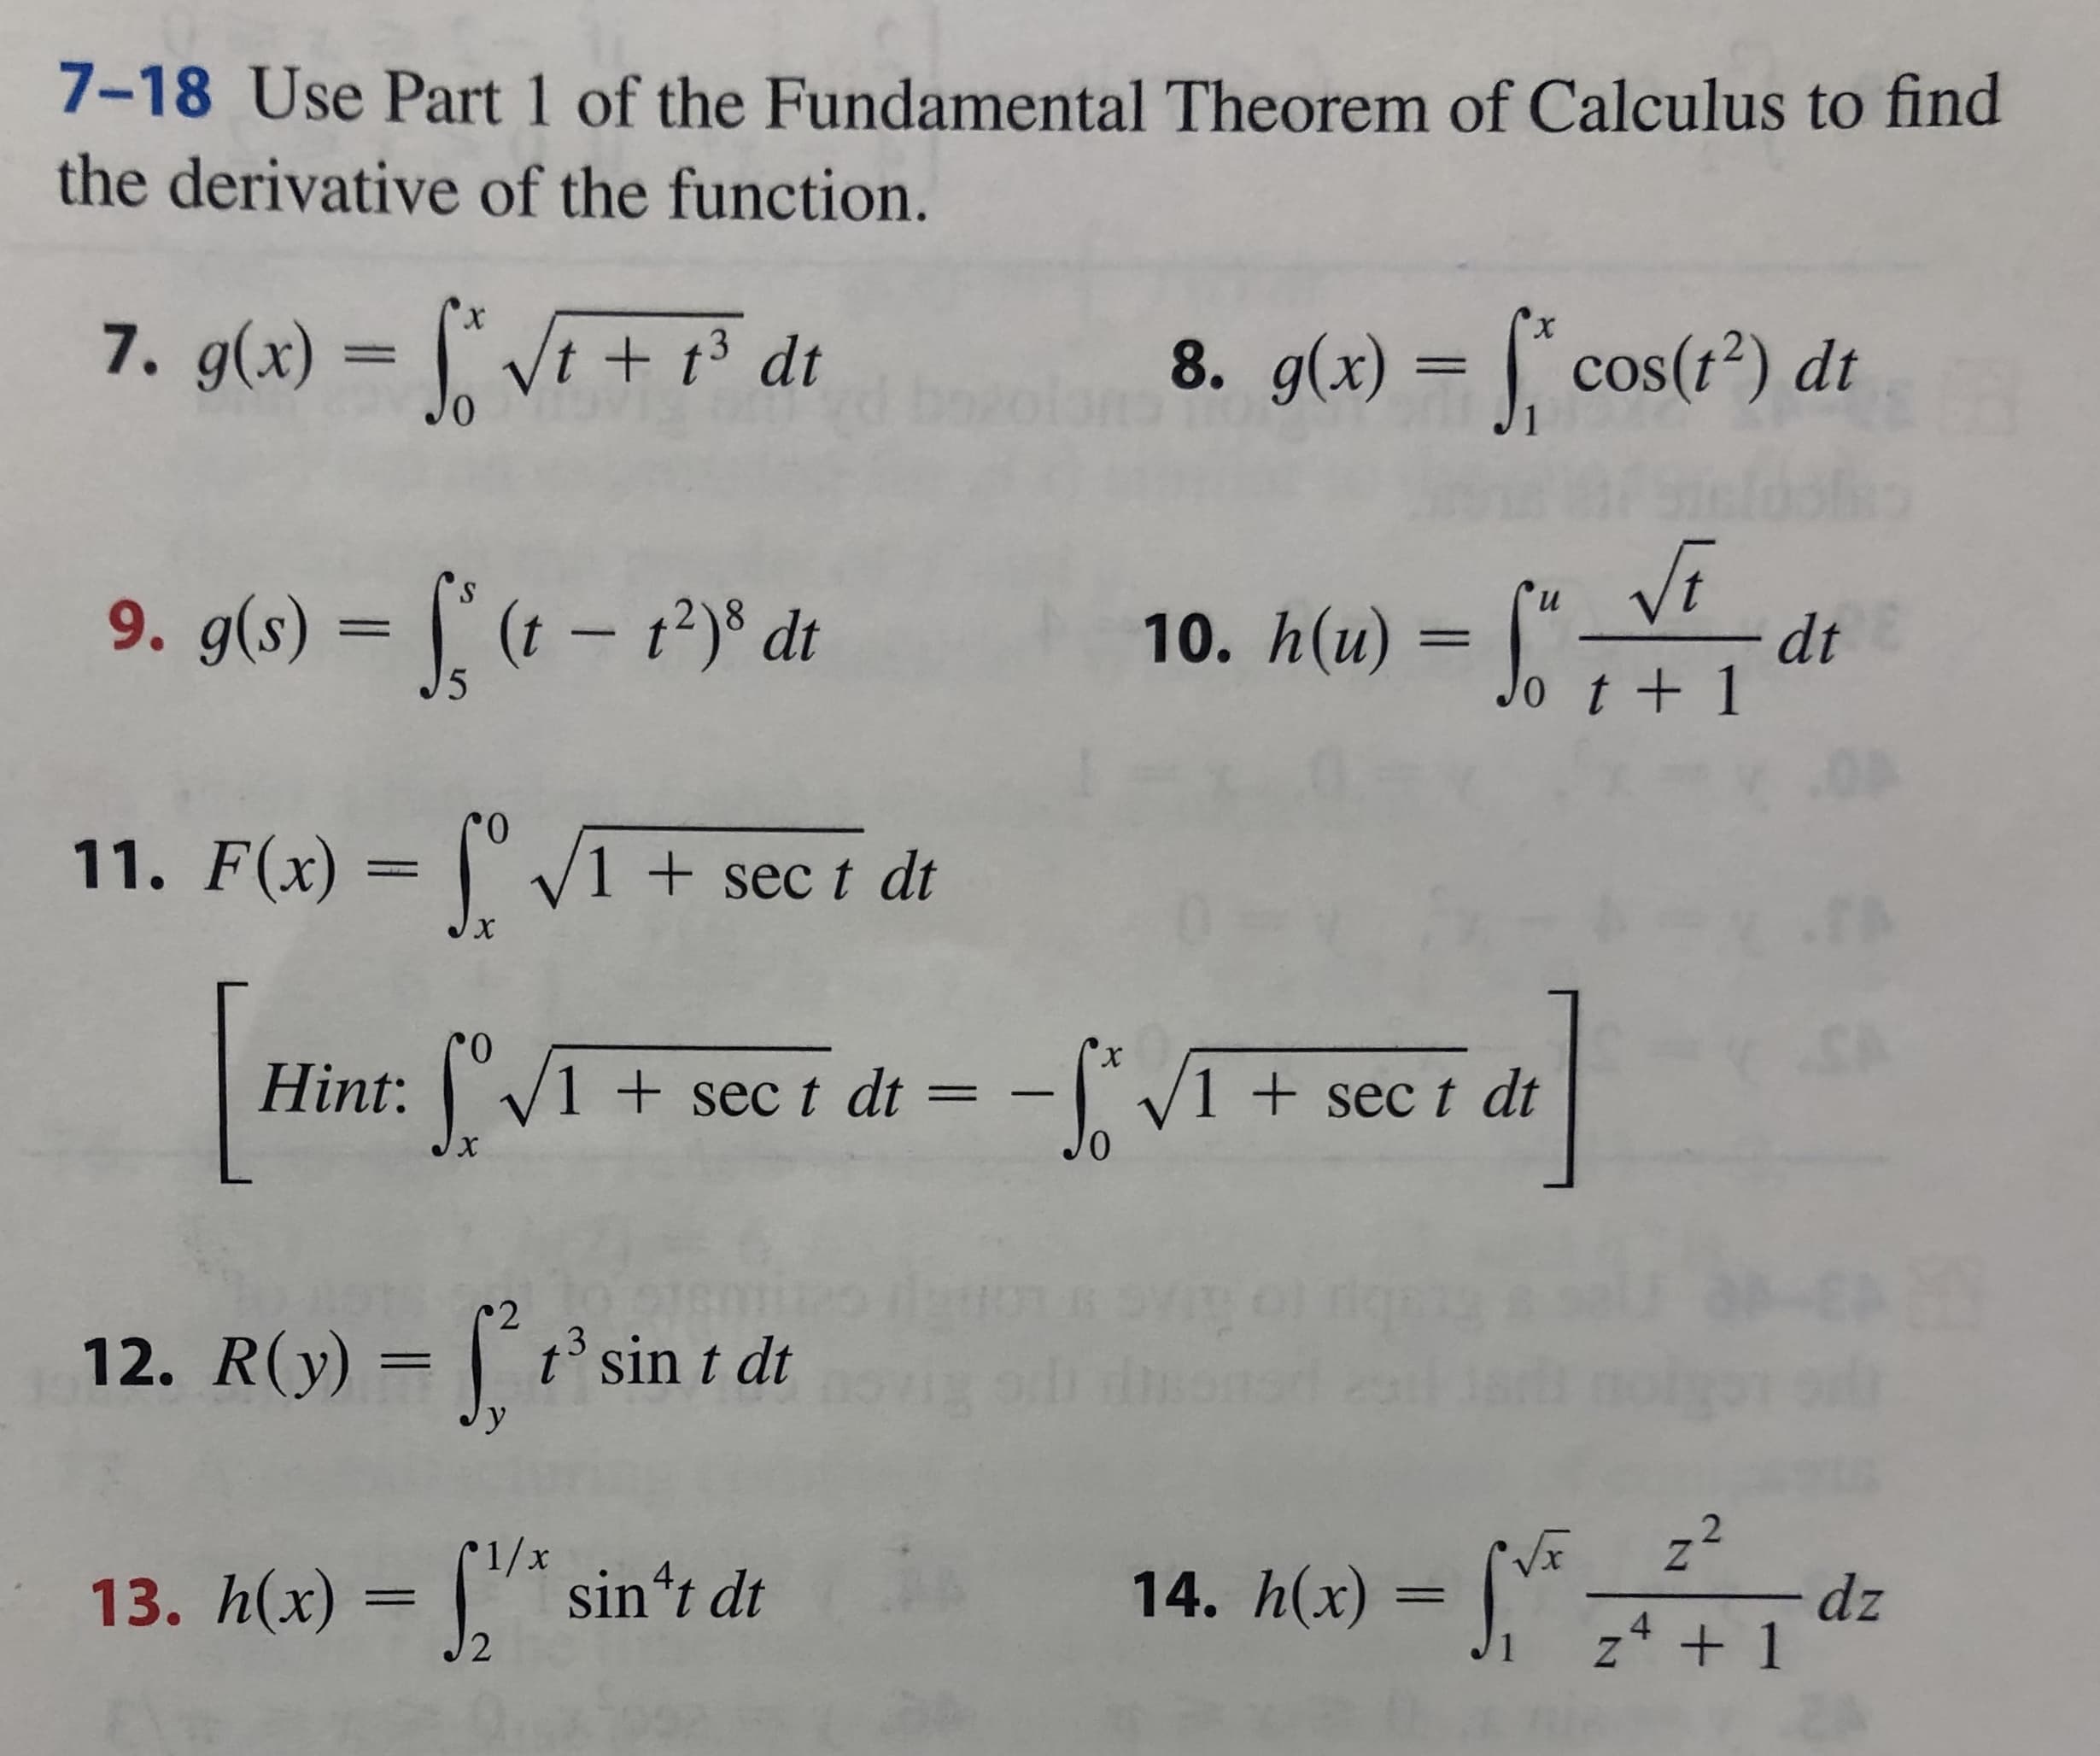 7-18 Use Part 1 of the Fundamental Theorem of Calculus to find
the derivative of the function.
7. g(x) Vt+ 13 dt
х
X
8. g(x) = cos( 2) dt
Vi
dt
t+ 1
9. g(s) (t- 12) d
и
10. h(u) =
5
11. F(x) V1 + sec t dt
х
X
Hint: 1+sec t dt= V1 +sec t dt
YTE
ubi e
12. R(y) t' sin t dt
у
2
Z
14. h(x)= 2 +1
13. h(x) = sin't dt
- dz
2
